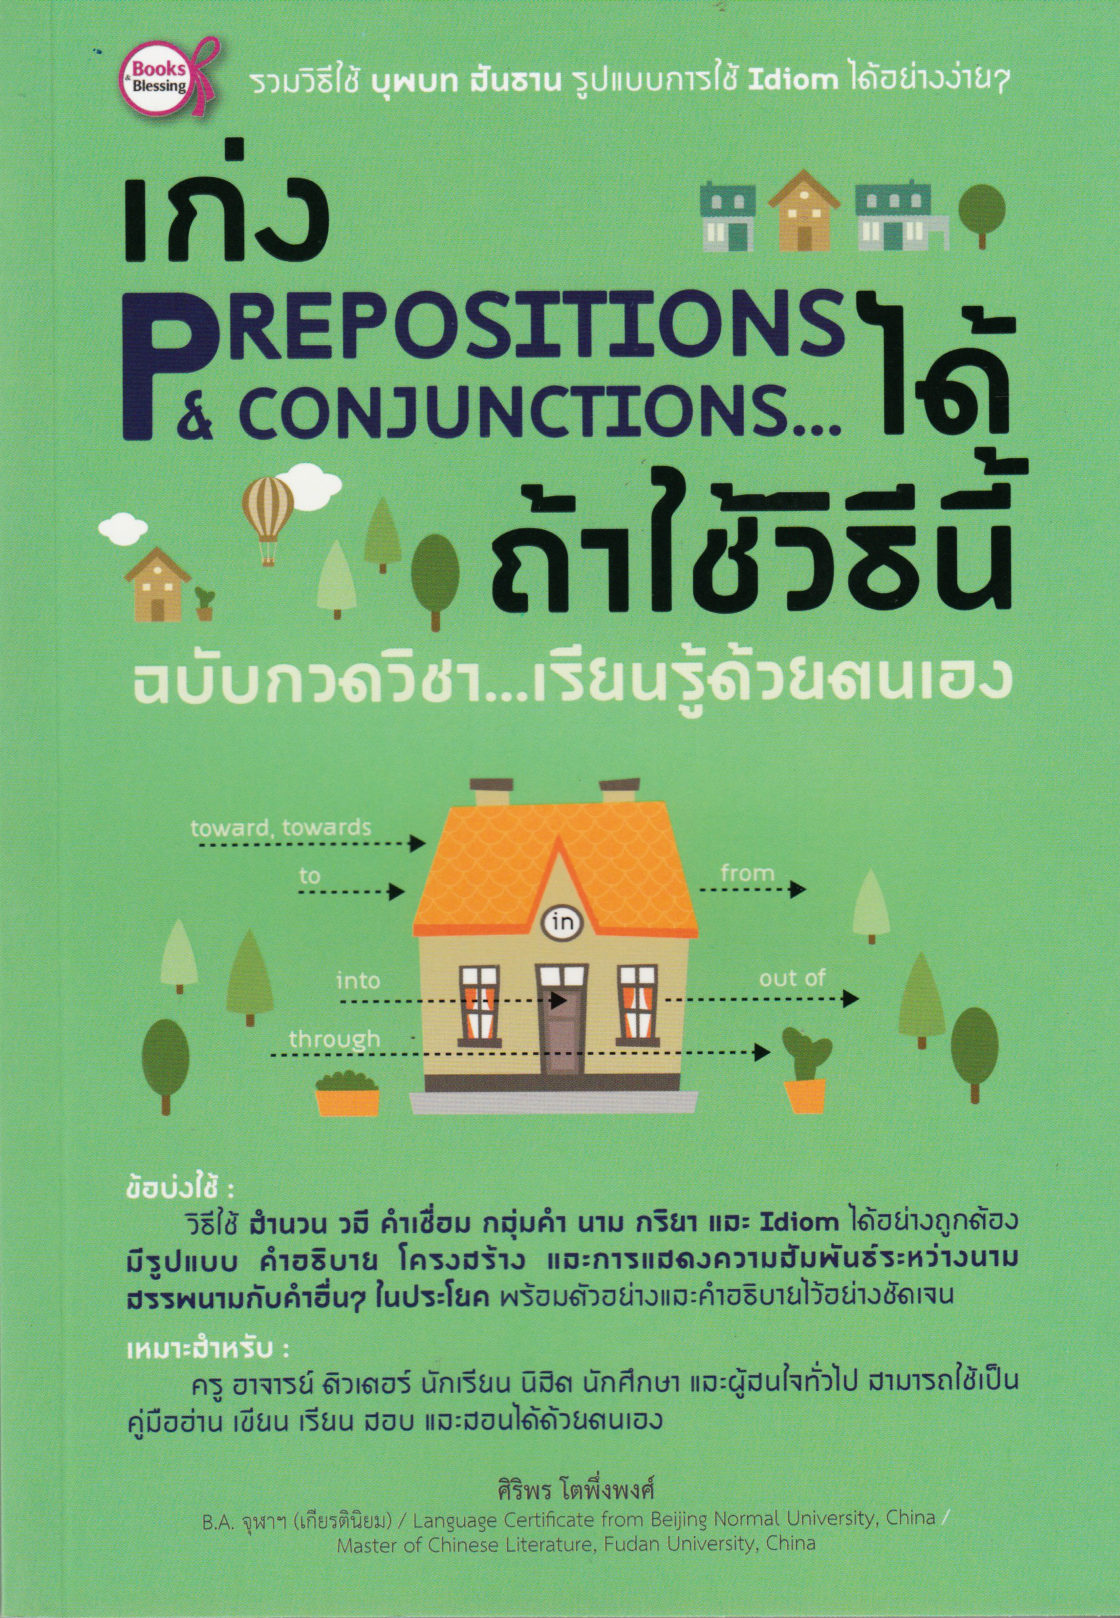 Prepositions & Conjunctions